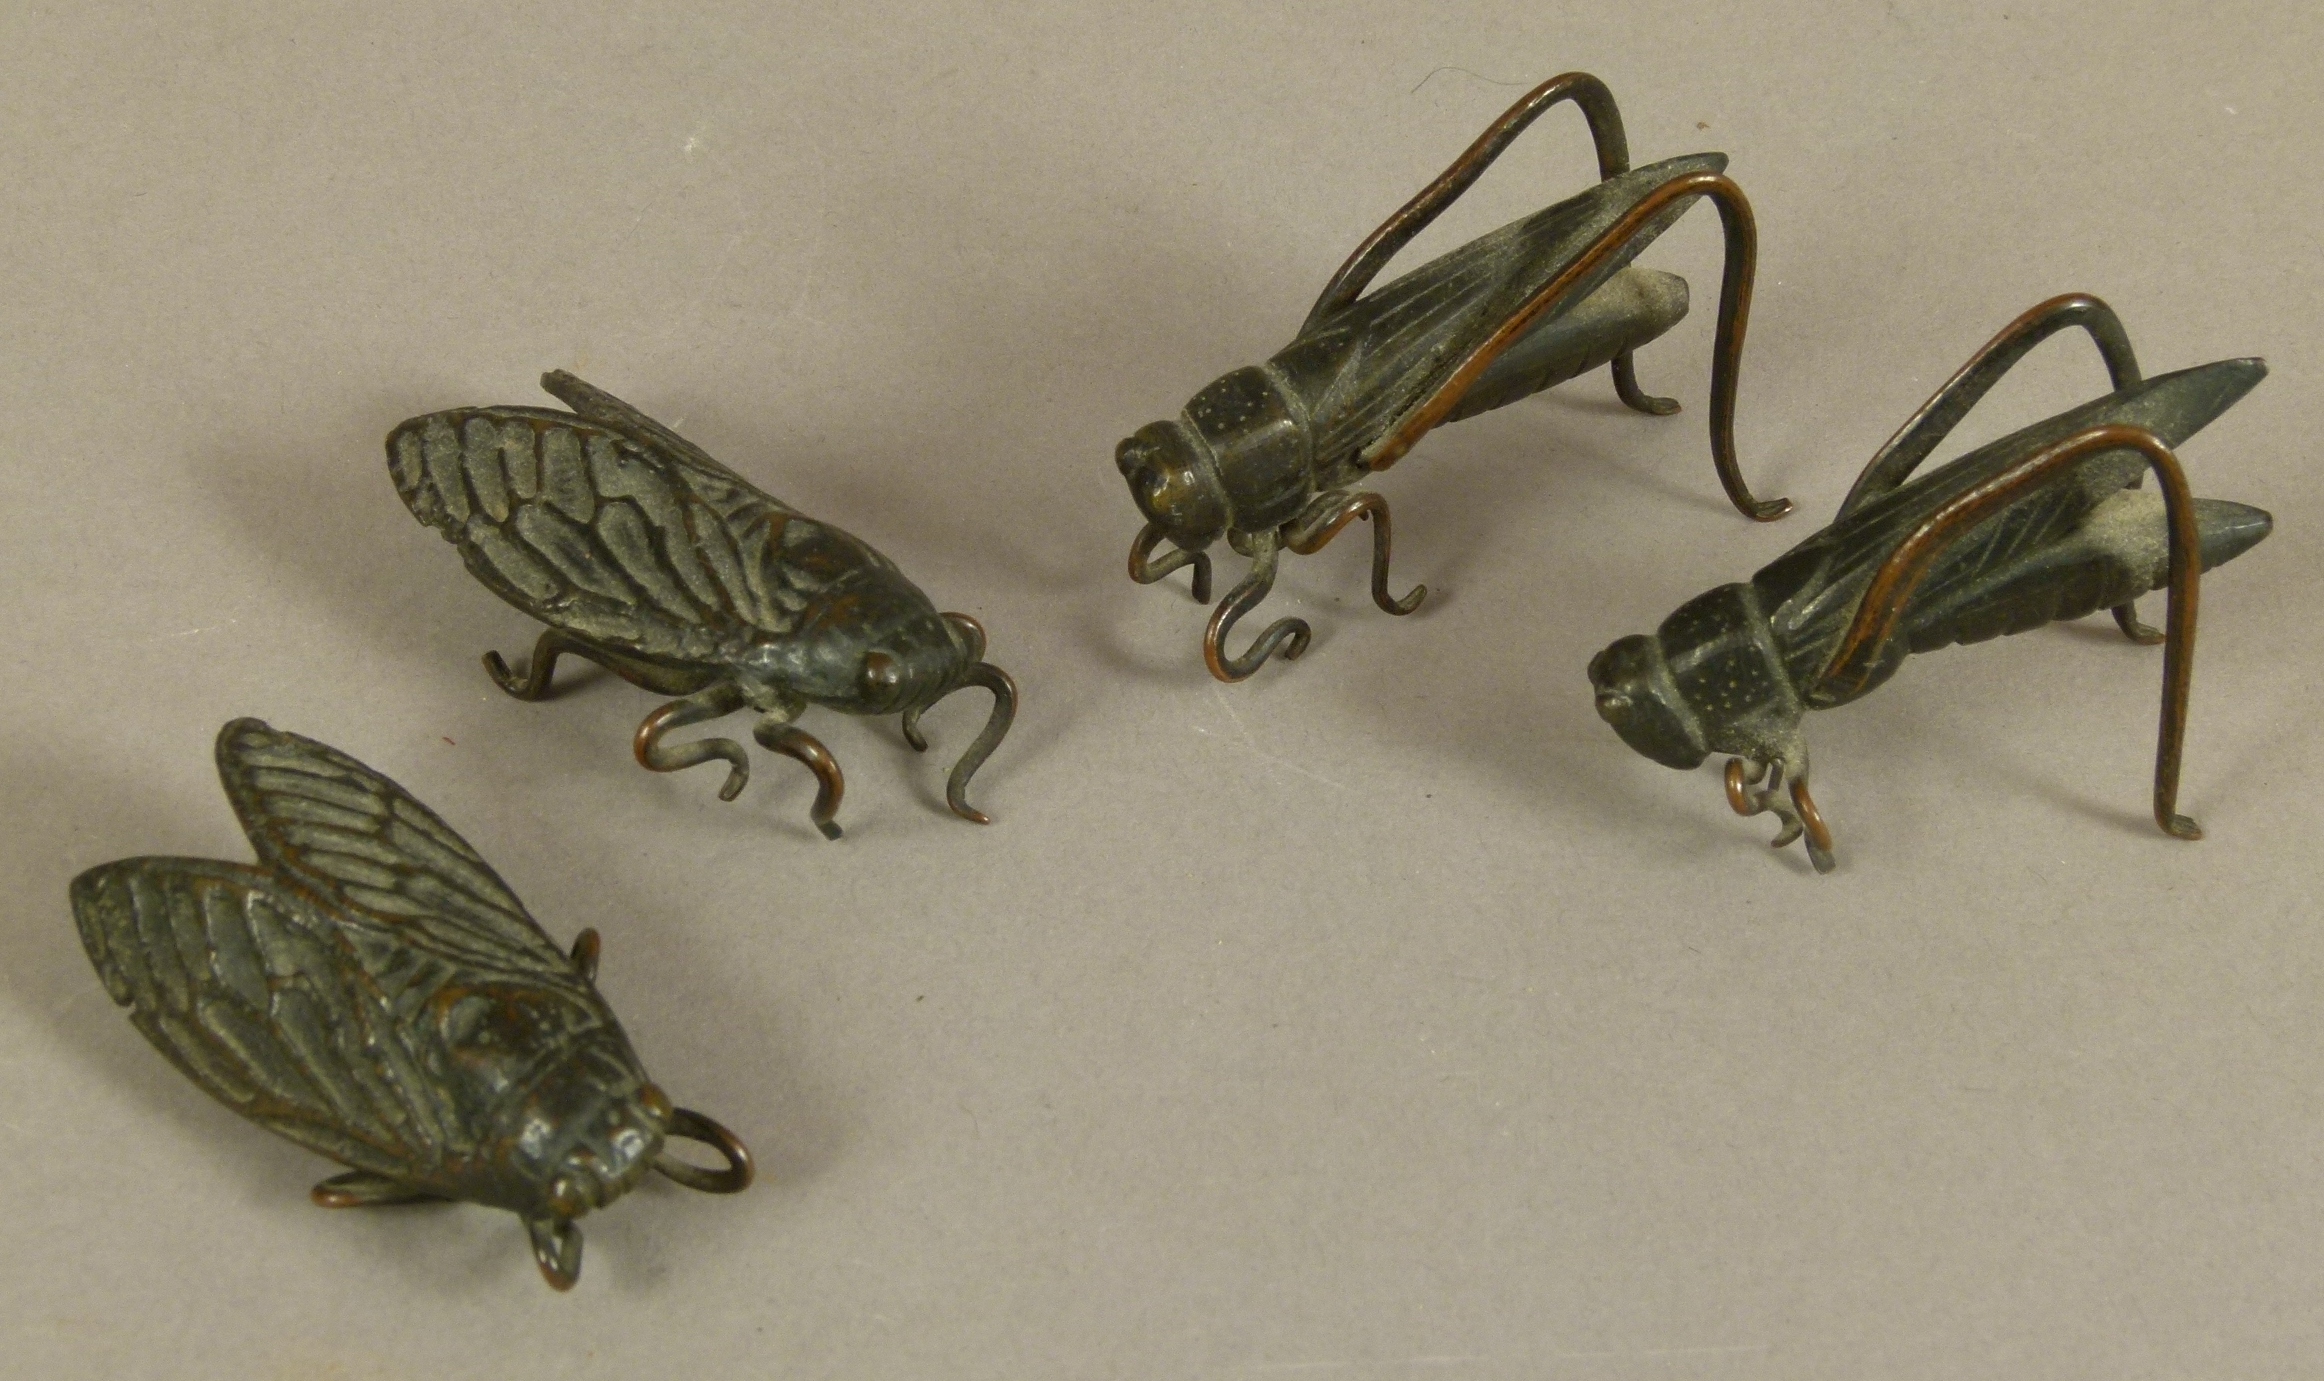 FOUR JAPANESE BRONZE INSECTS, Meiji period including two crickets and two cicadas, 5cm wide and - Image 2 of 2